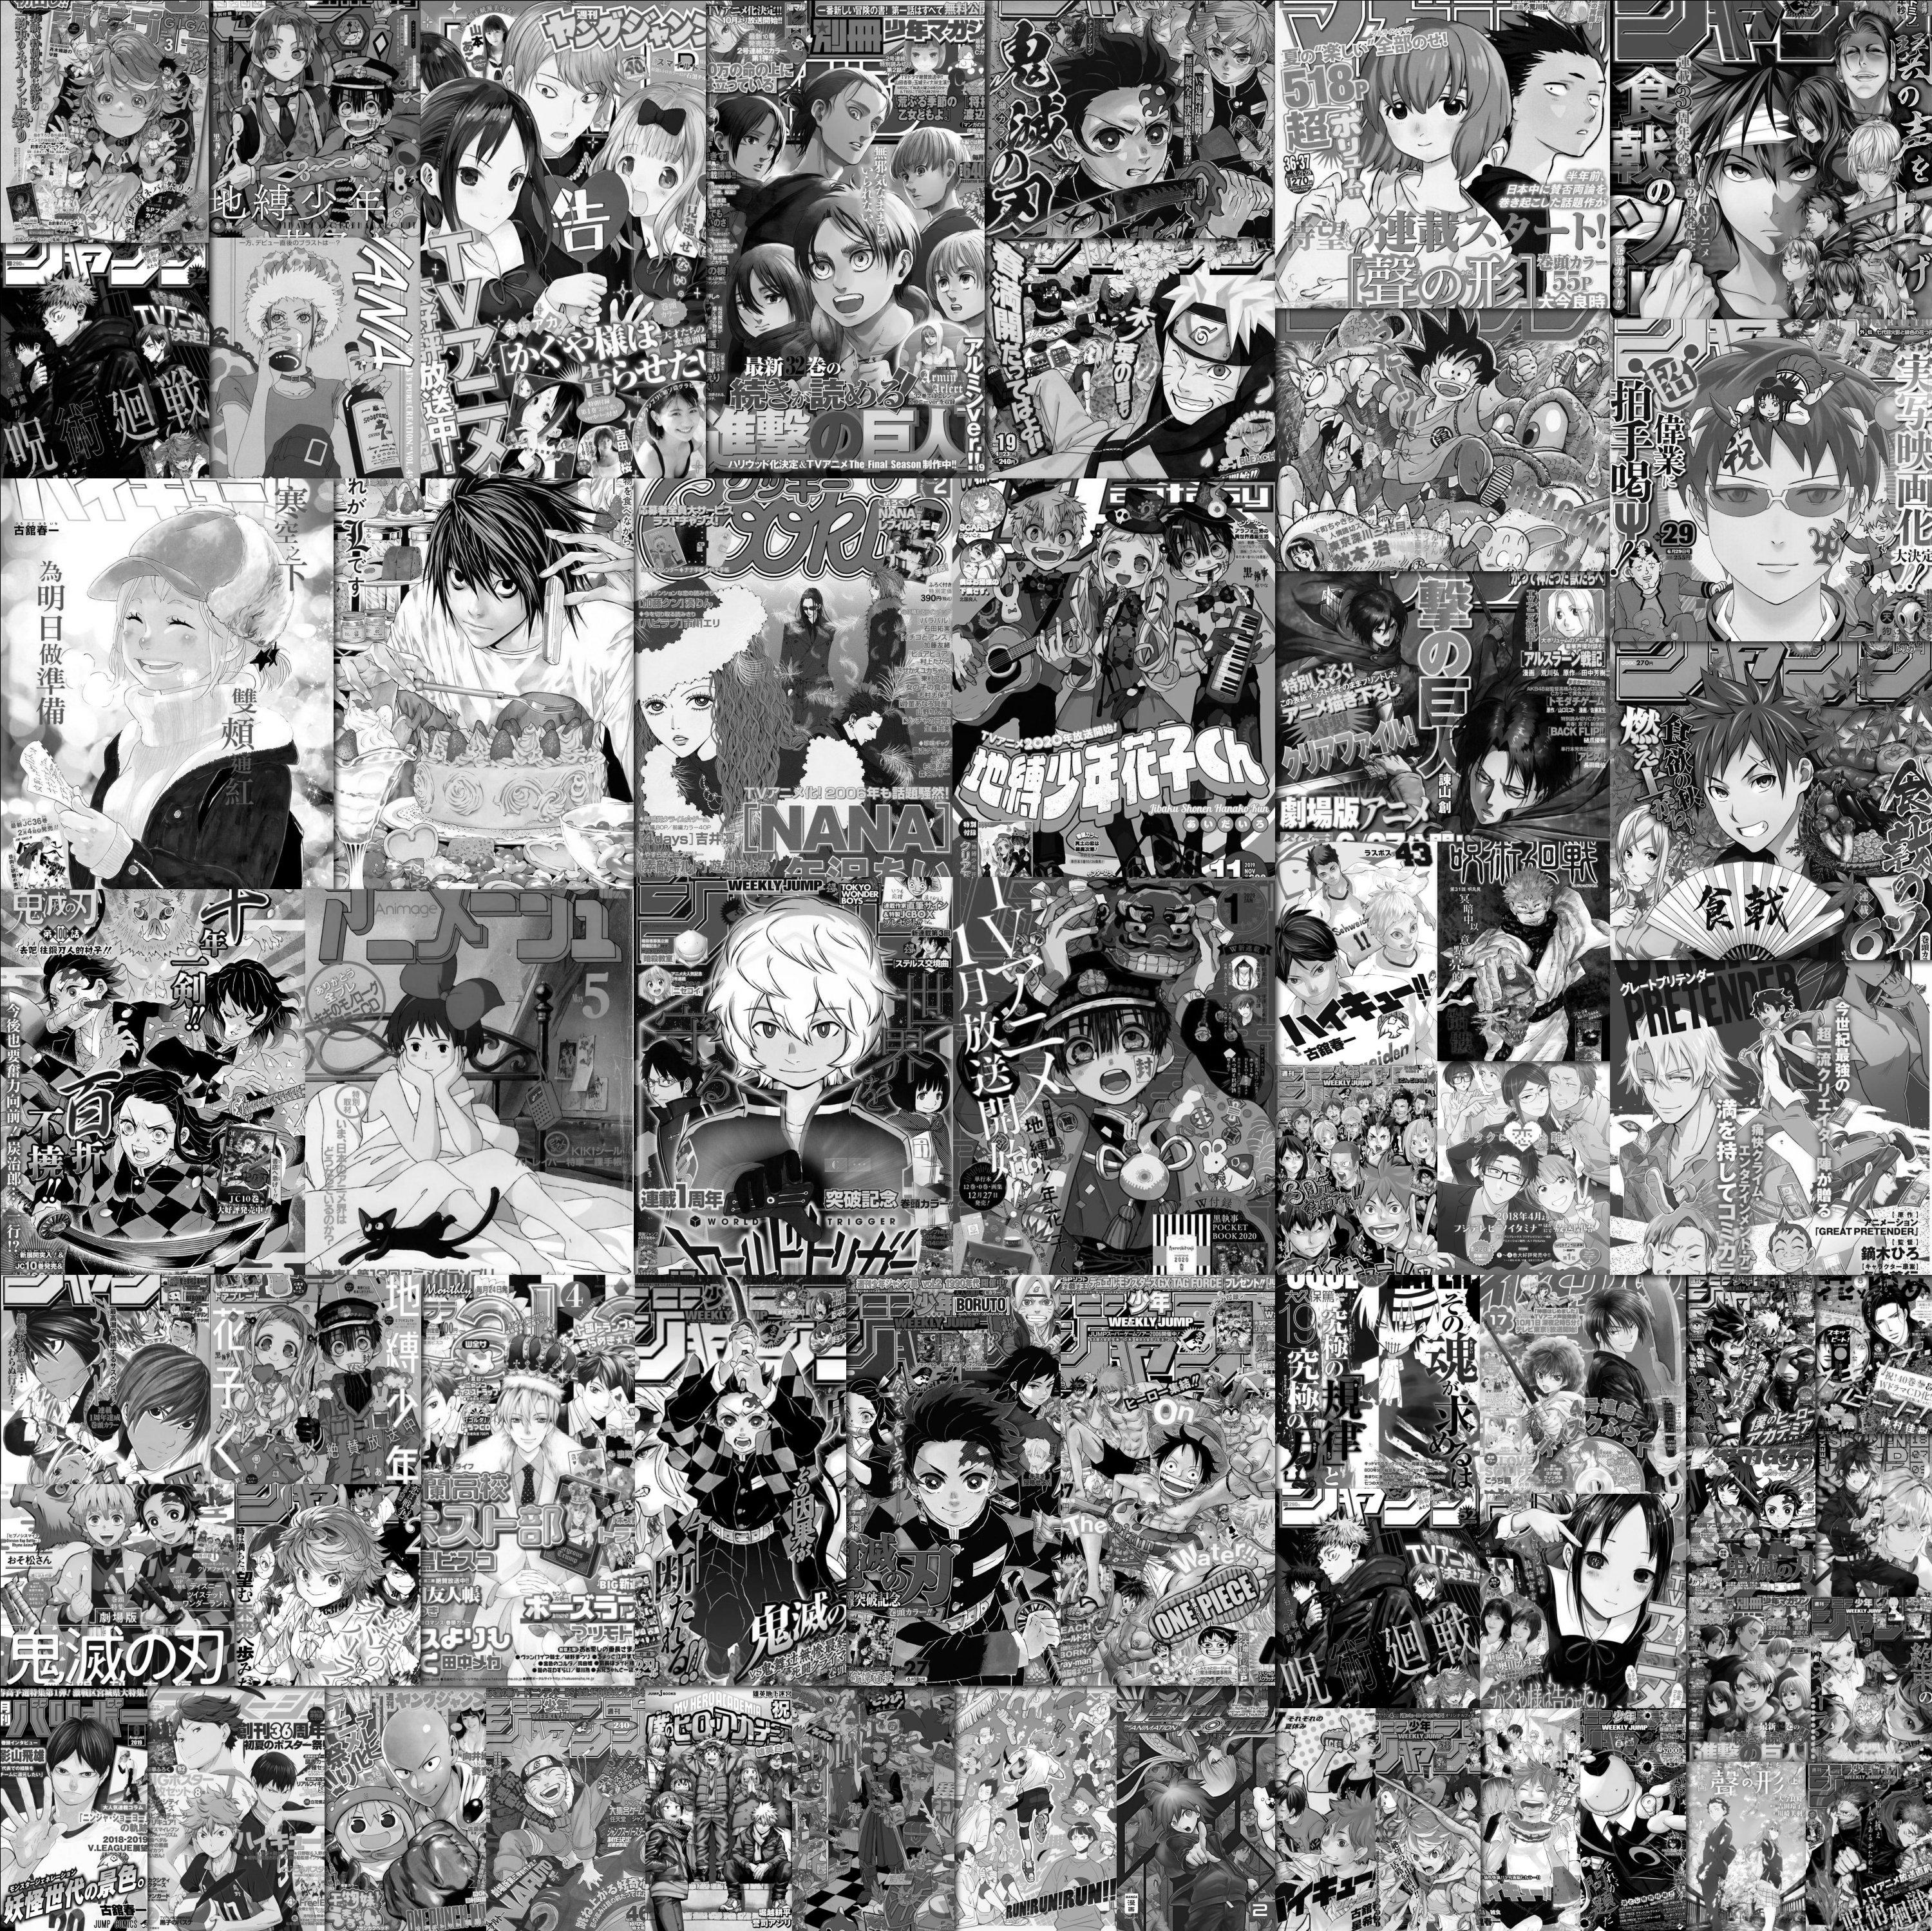 Anime Manga Wall Collage Kit Black And White Instant